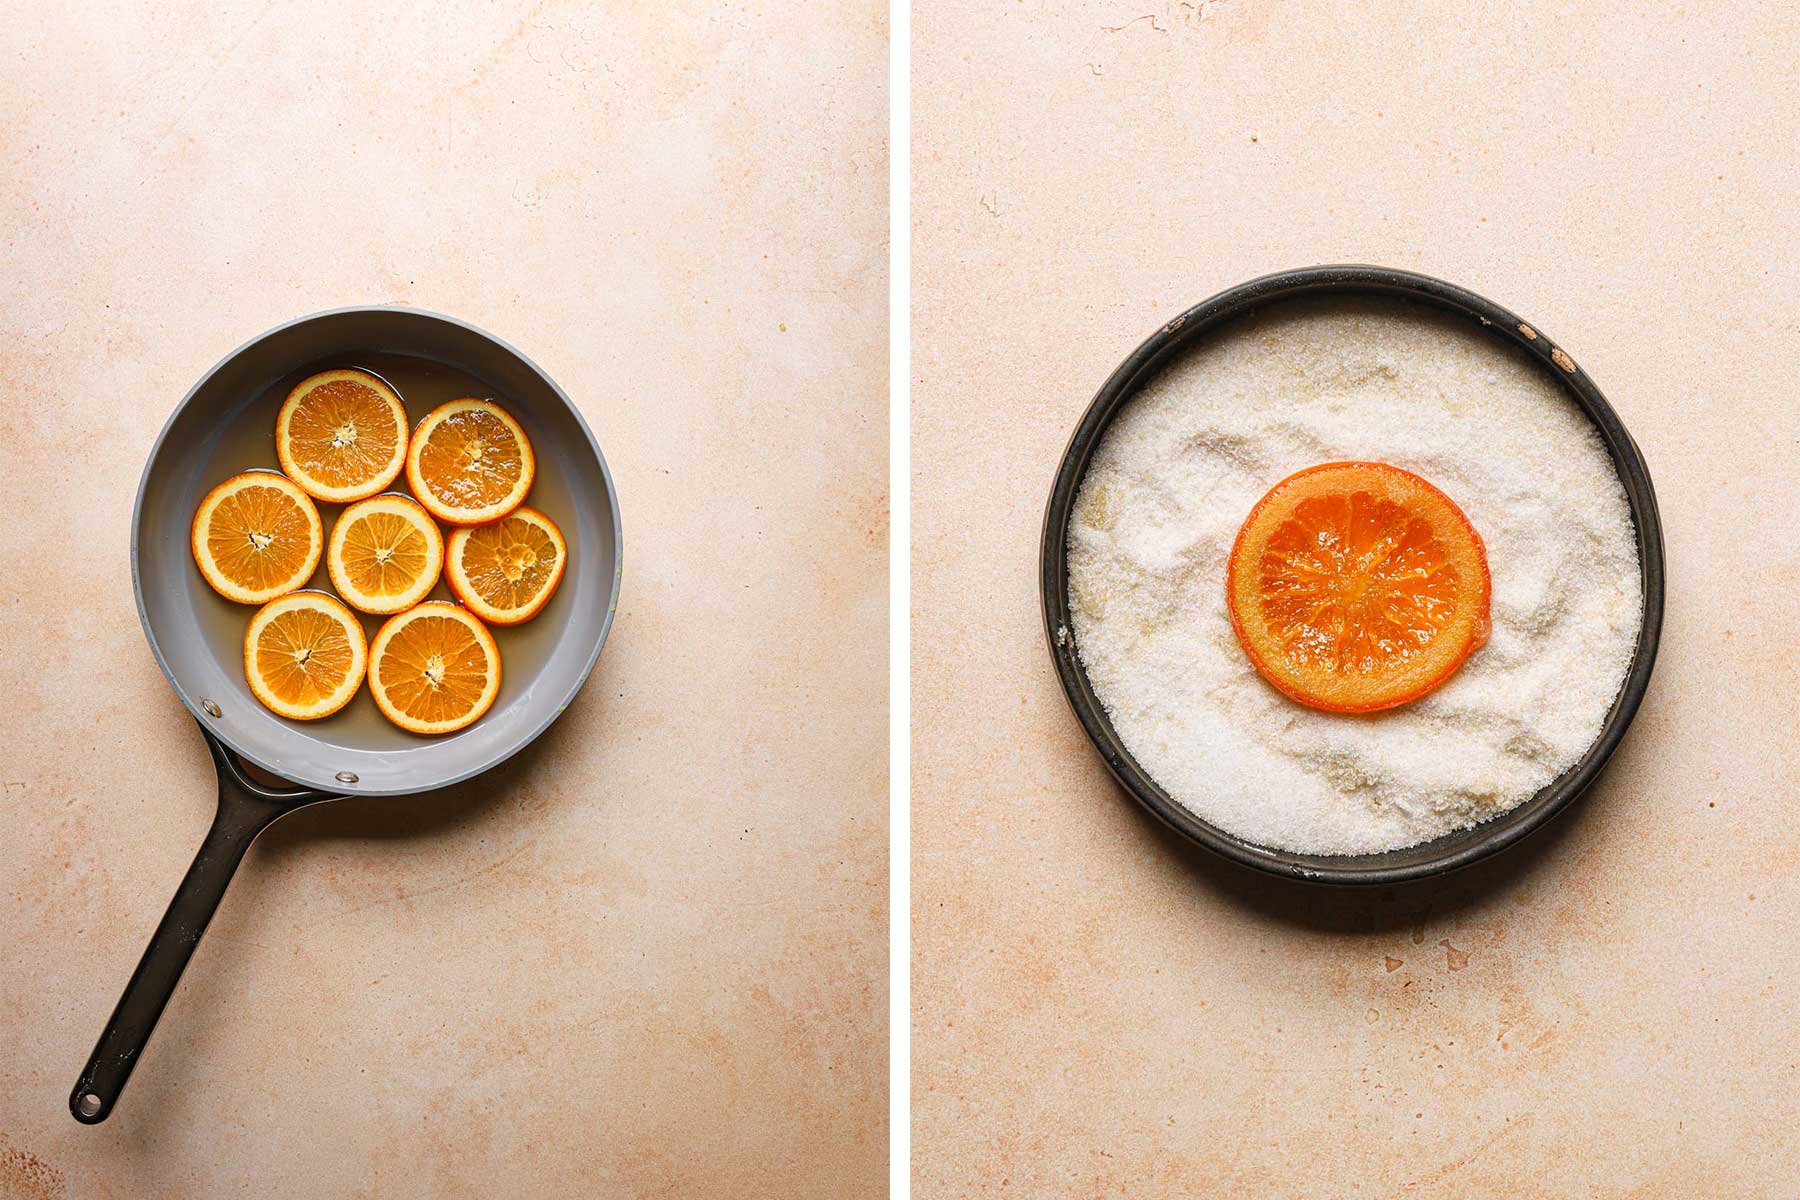 Orange slices in a wide skillet with water. Orange slice in a bowl full of sugar.